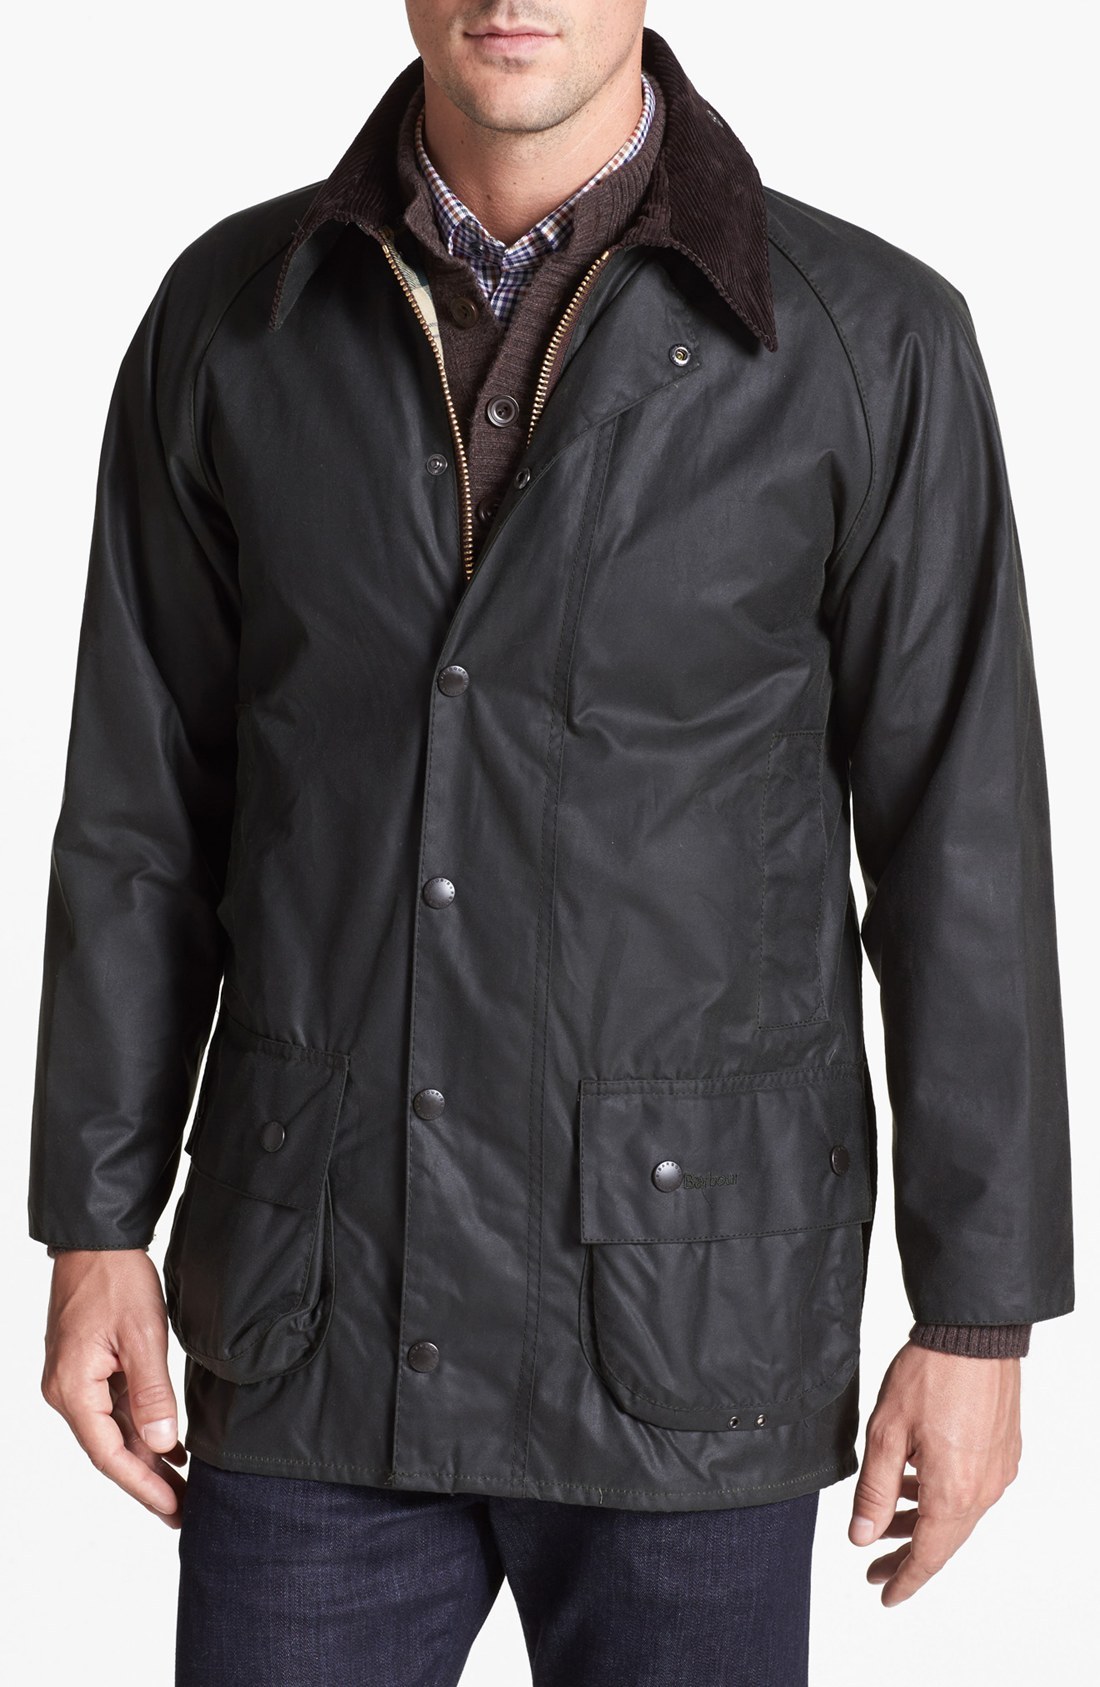 It’s On Sale: Barbour Jackets – Put This On